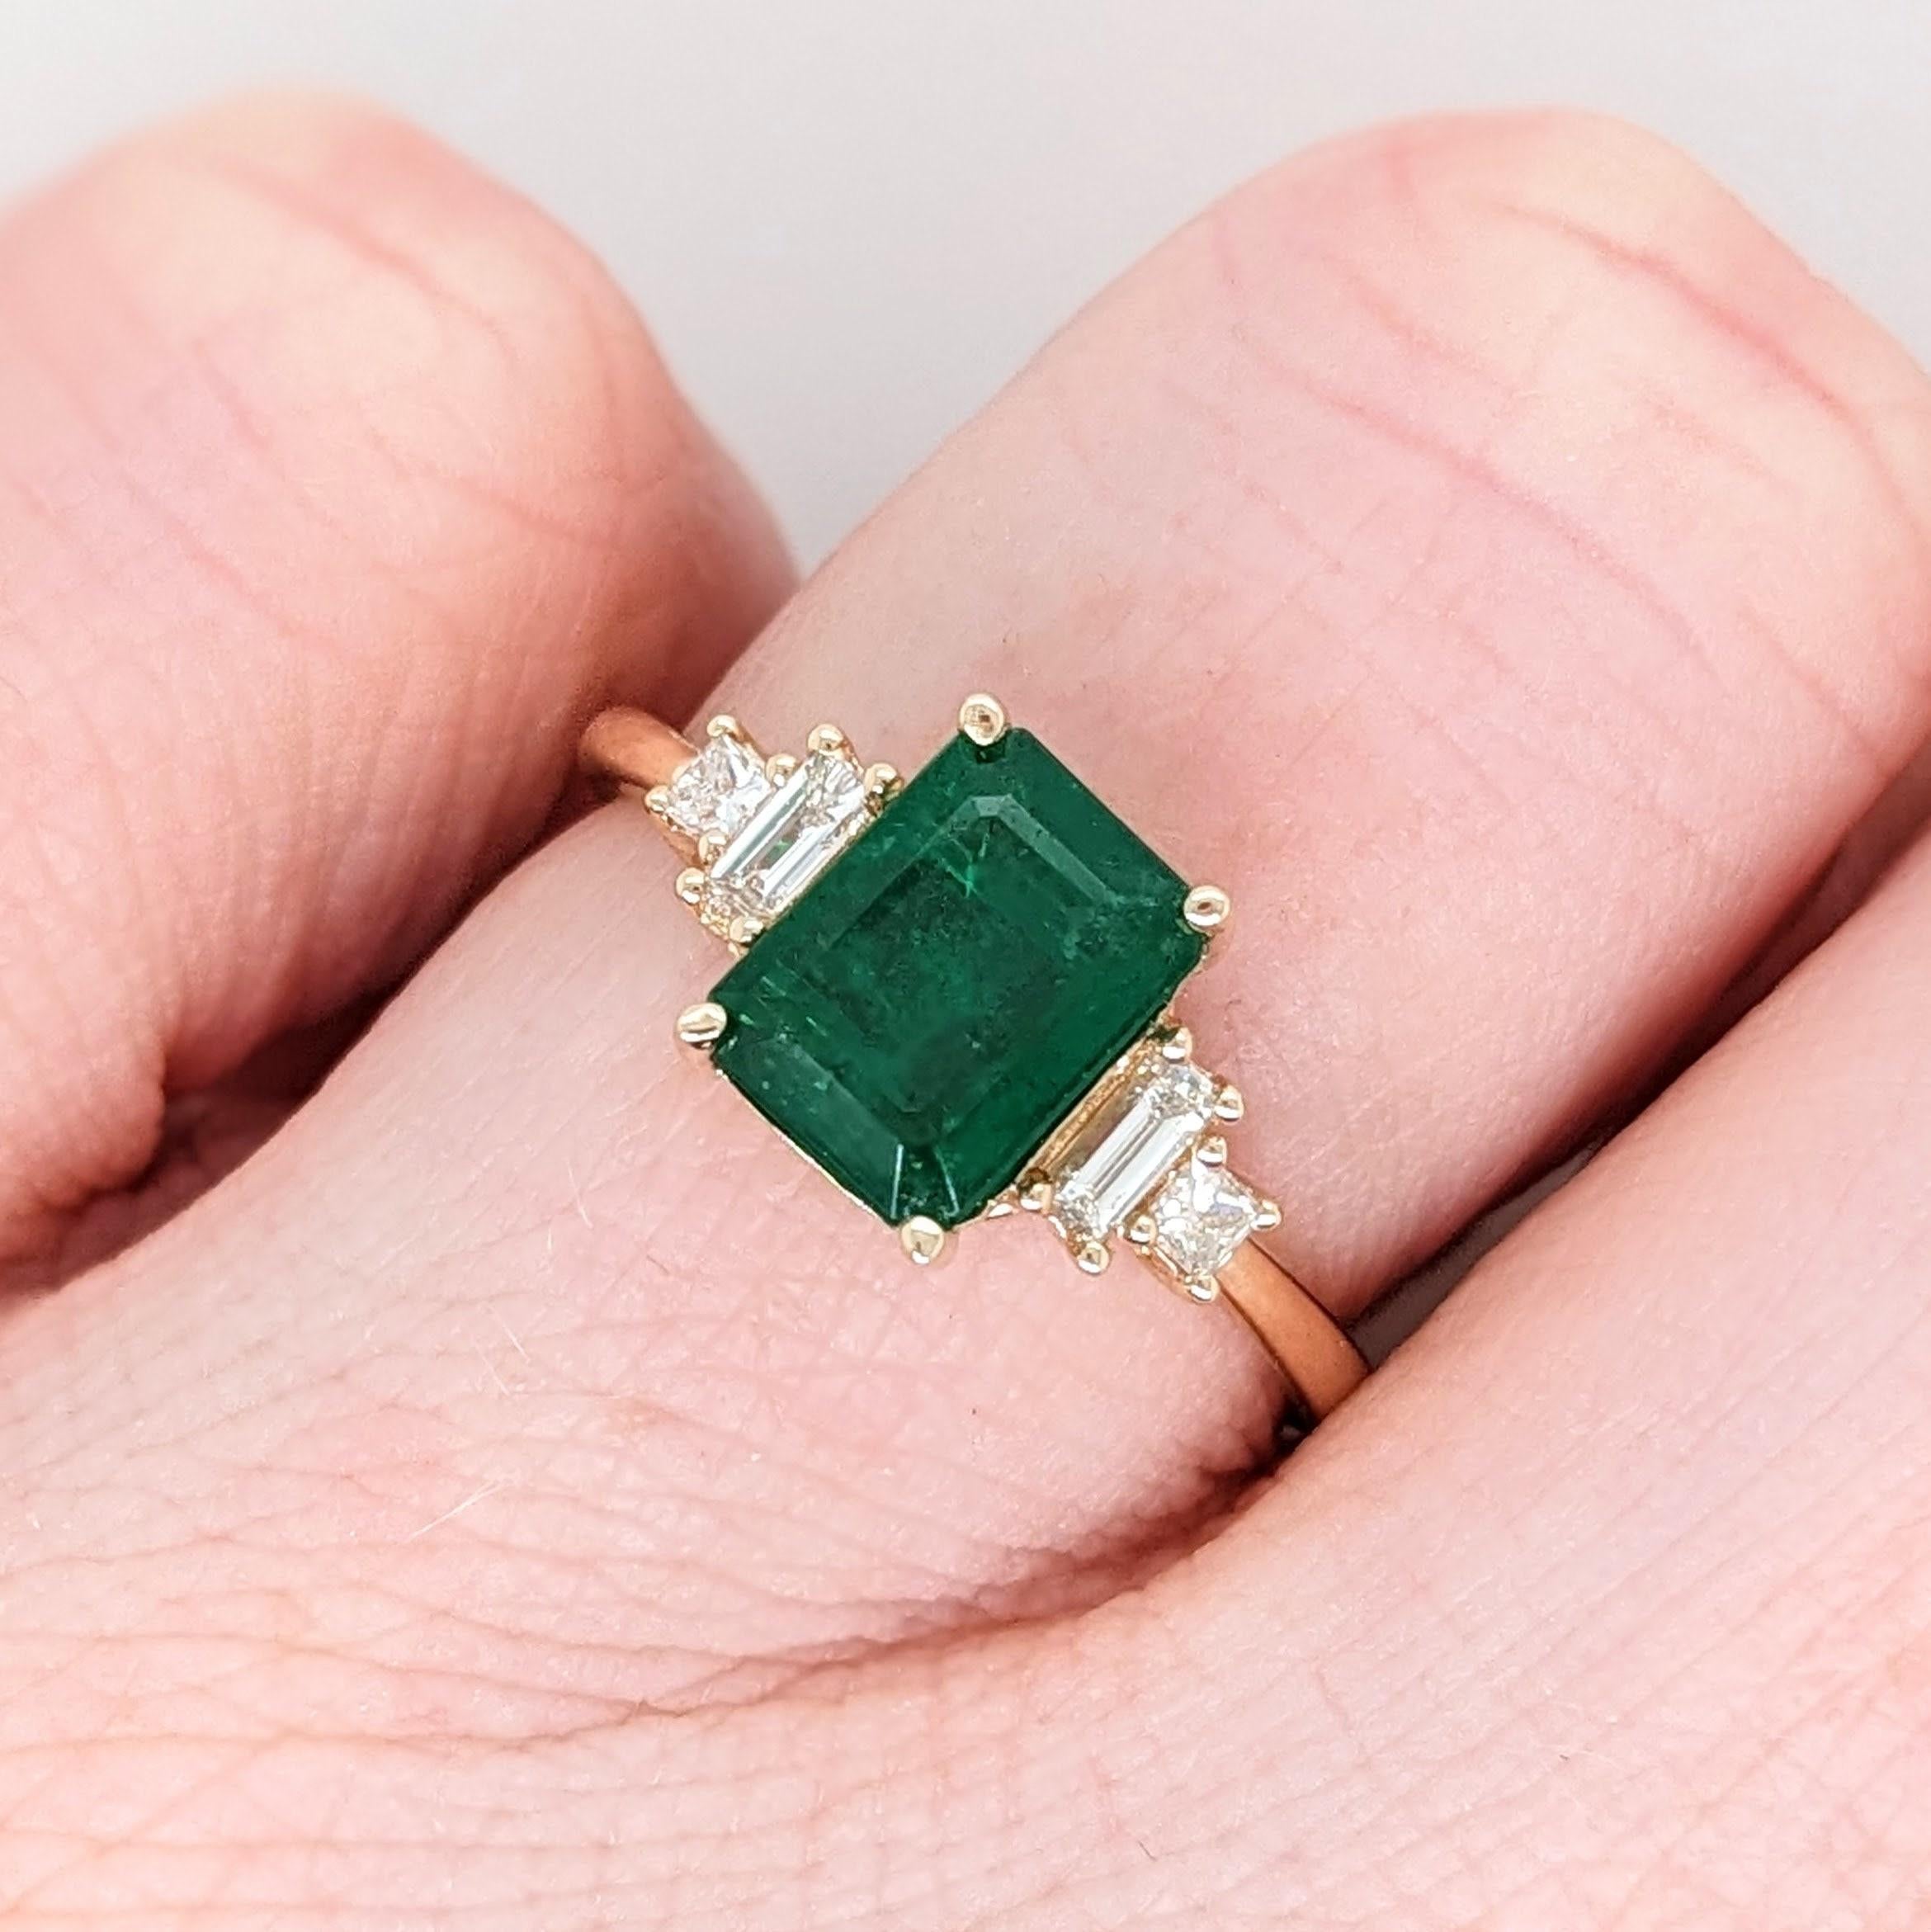 Emerald Cut 1.5ct Emerald Ring w Earth Mined Diamonds in Solid 14K Yellow Gold EM 8x6mm For Sale